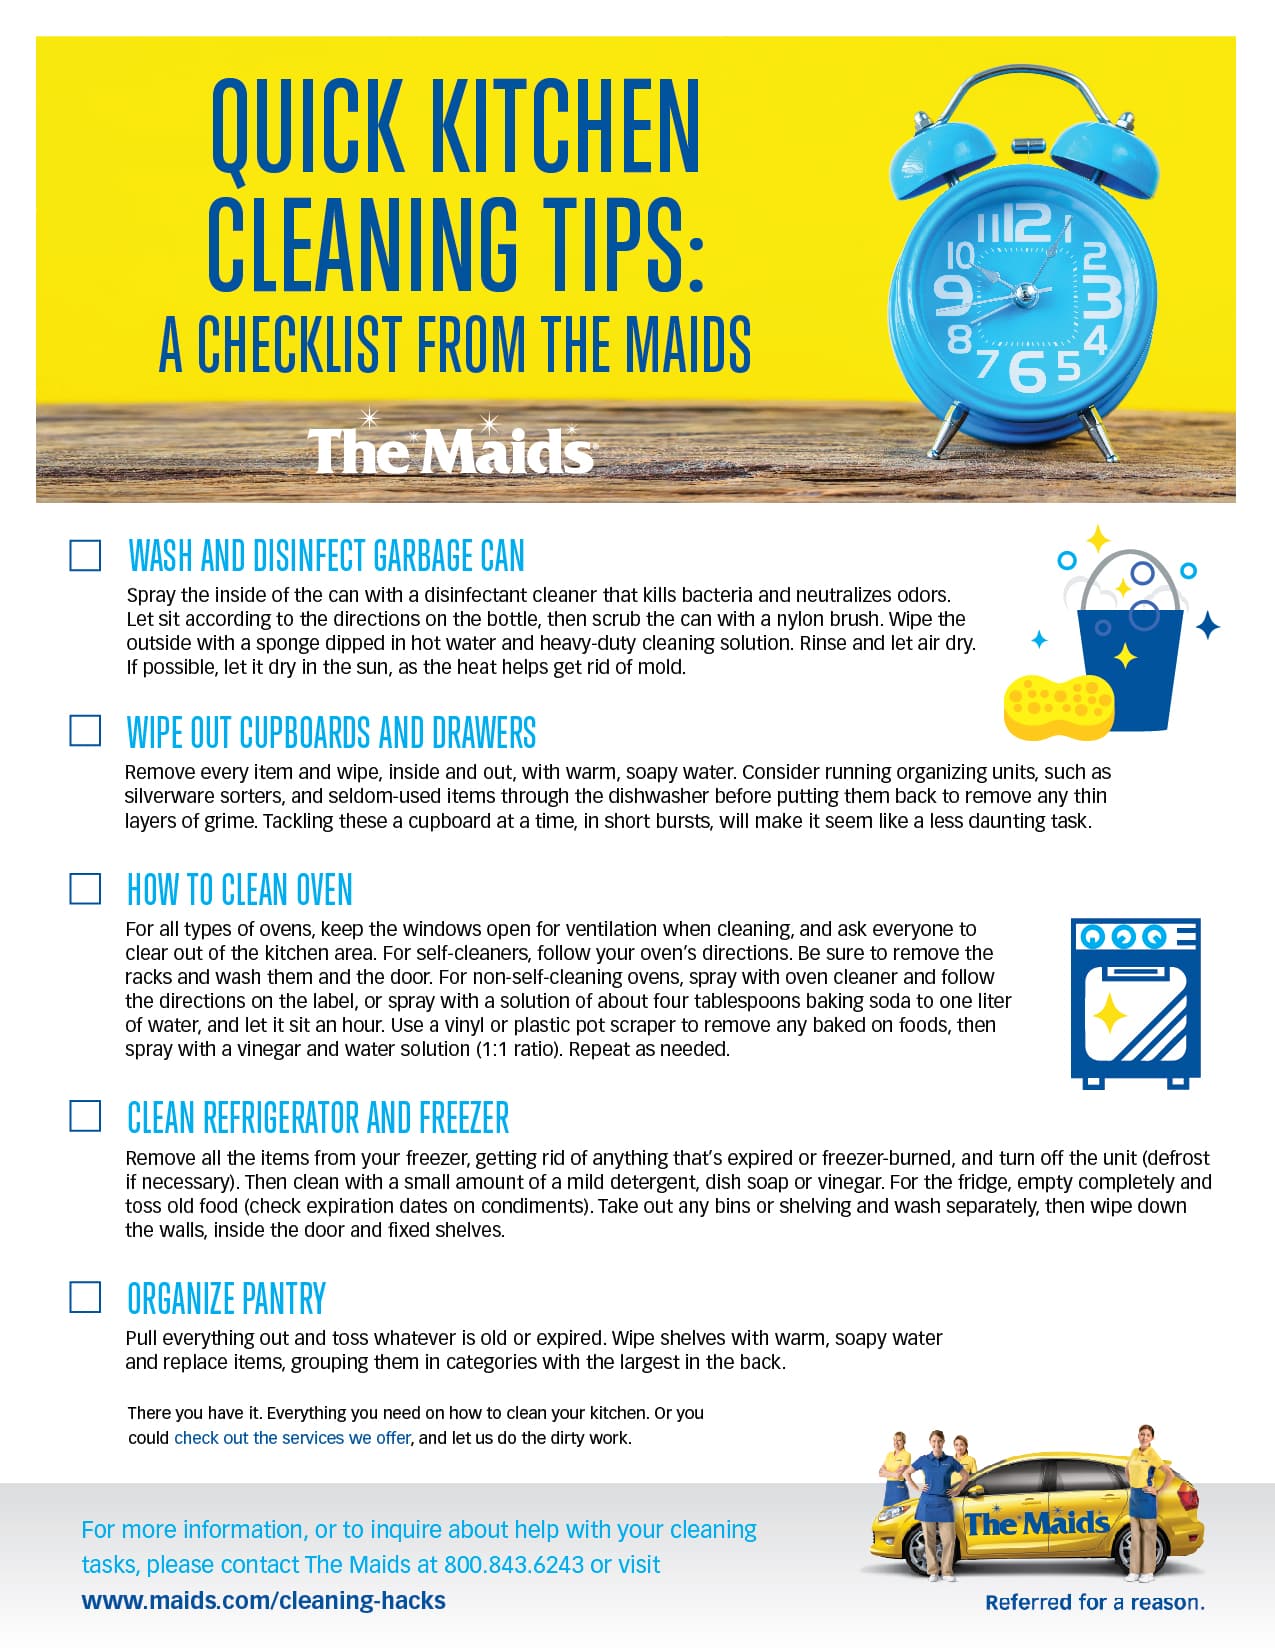 8 Kitchen Cleaning Tips That Take Five Minutes or Less